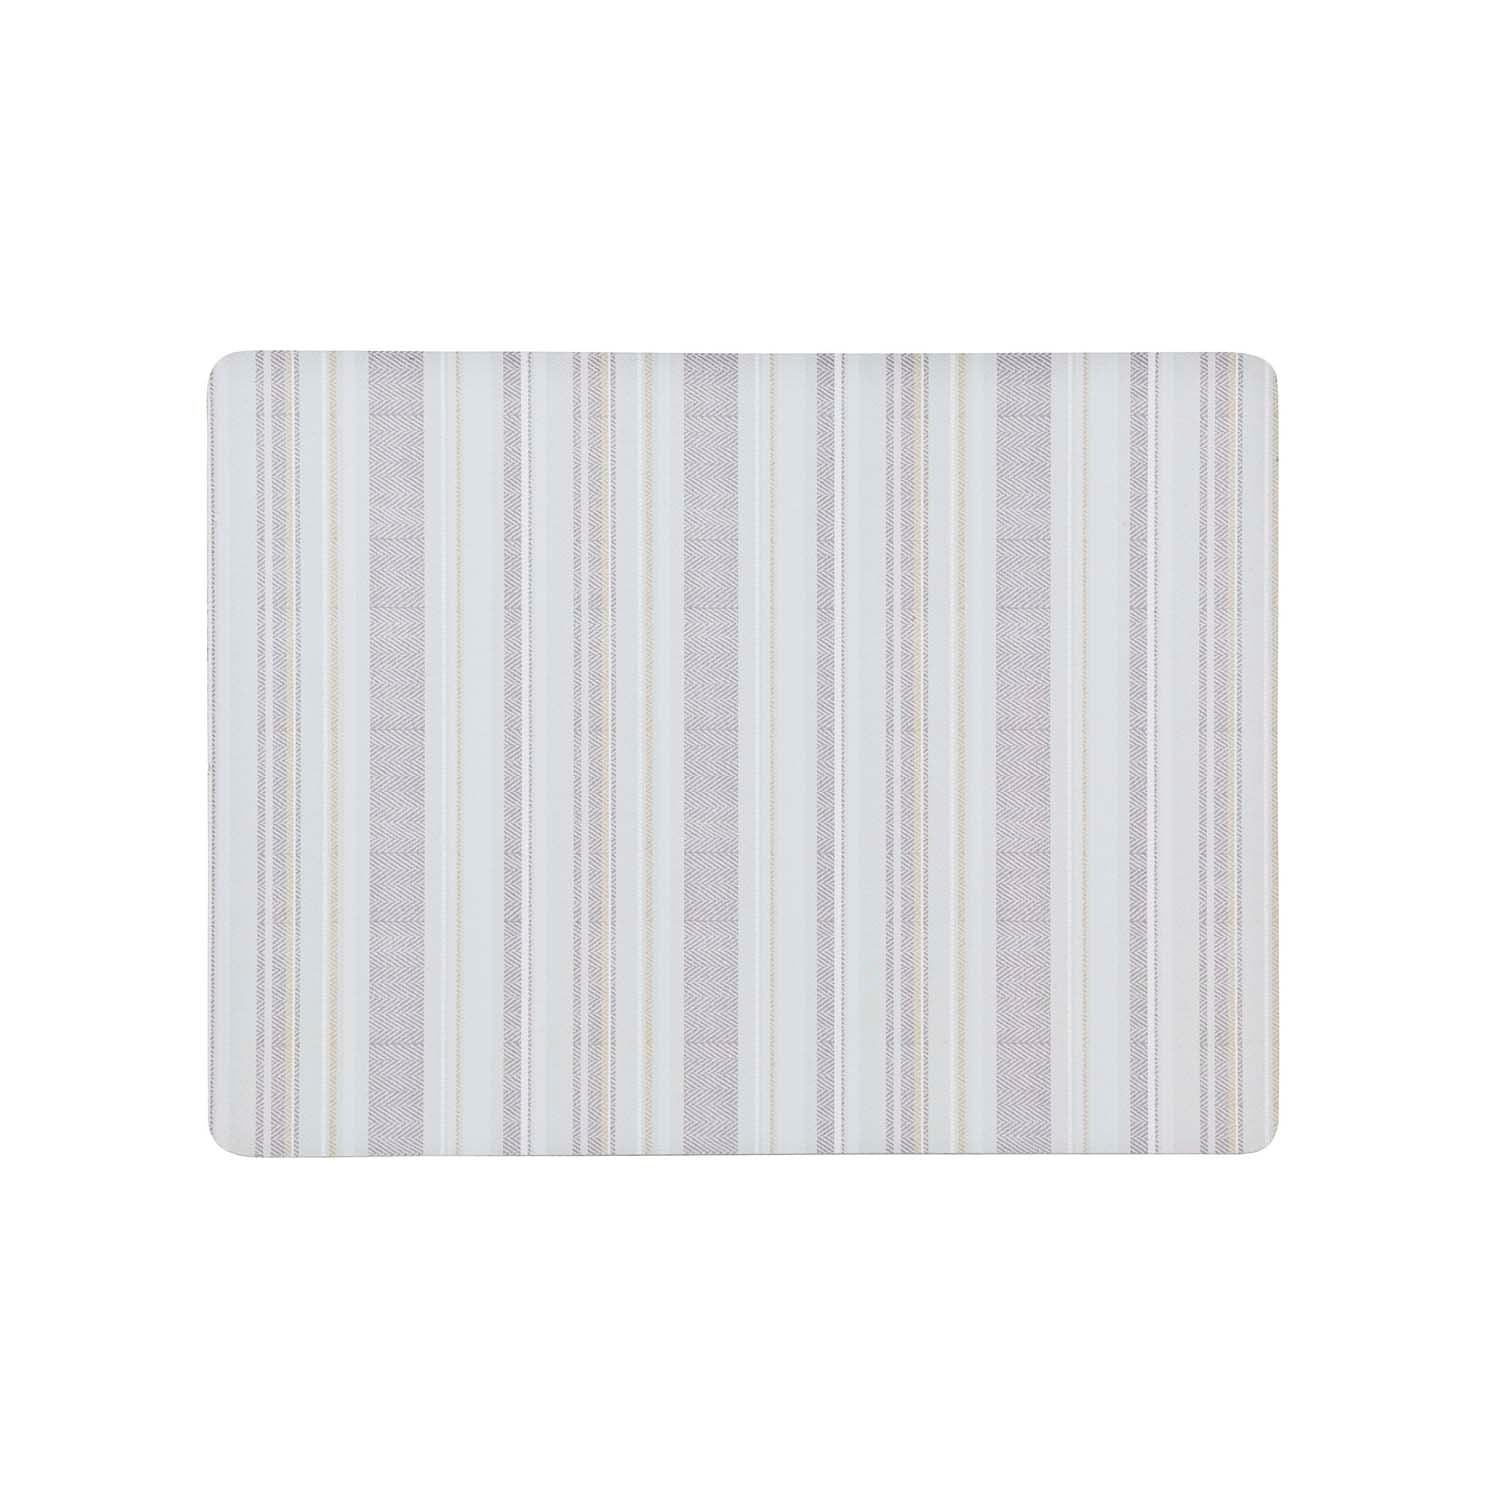 Denby Placemats - Cream Stripe - Set of 6 1 Shaws Department Stores